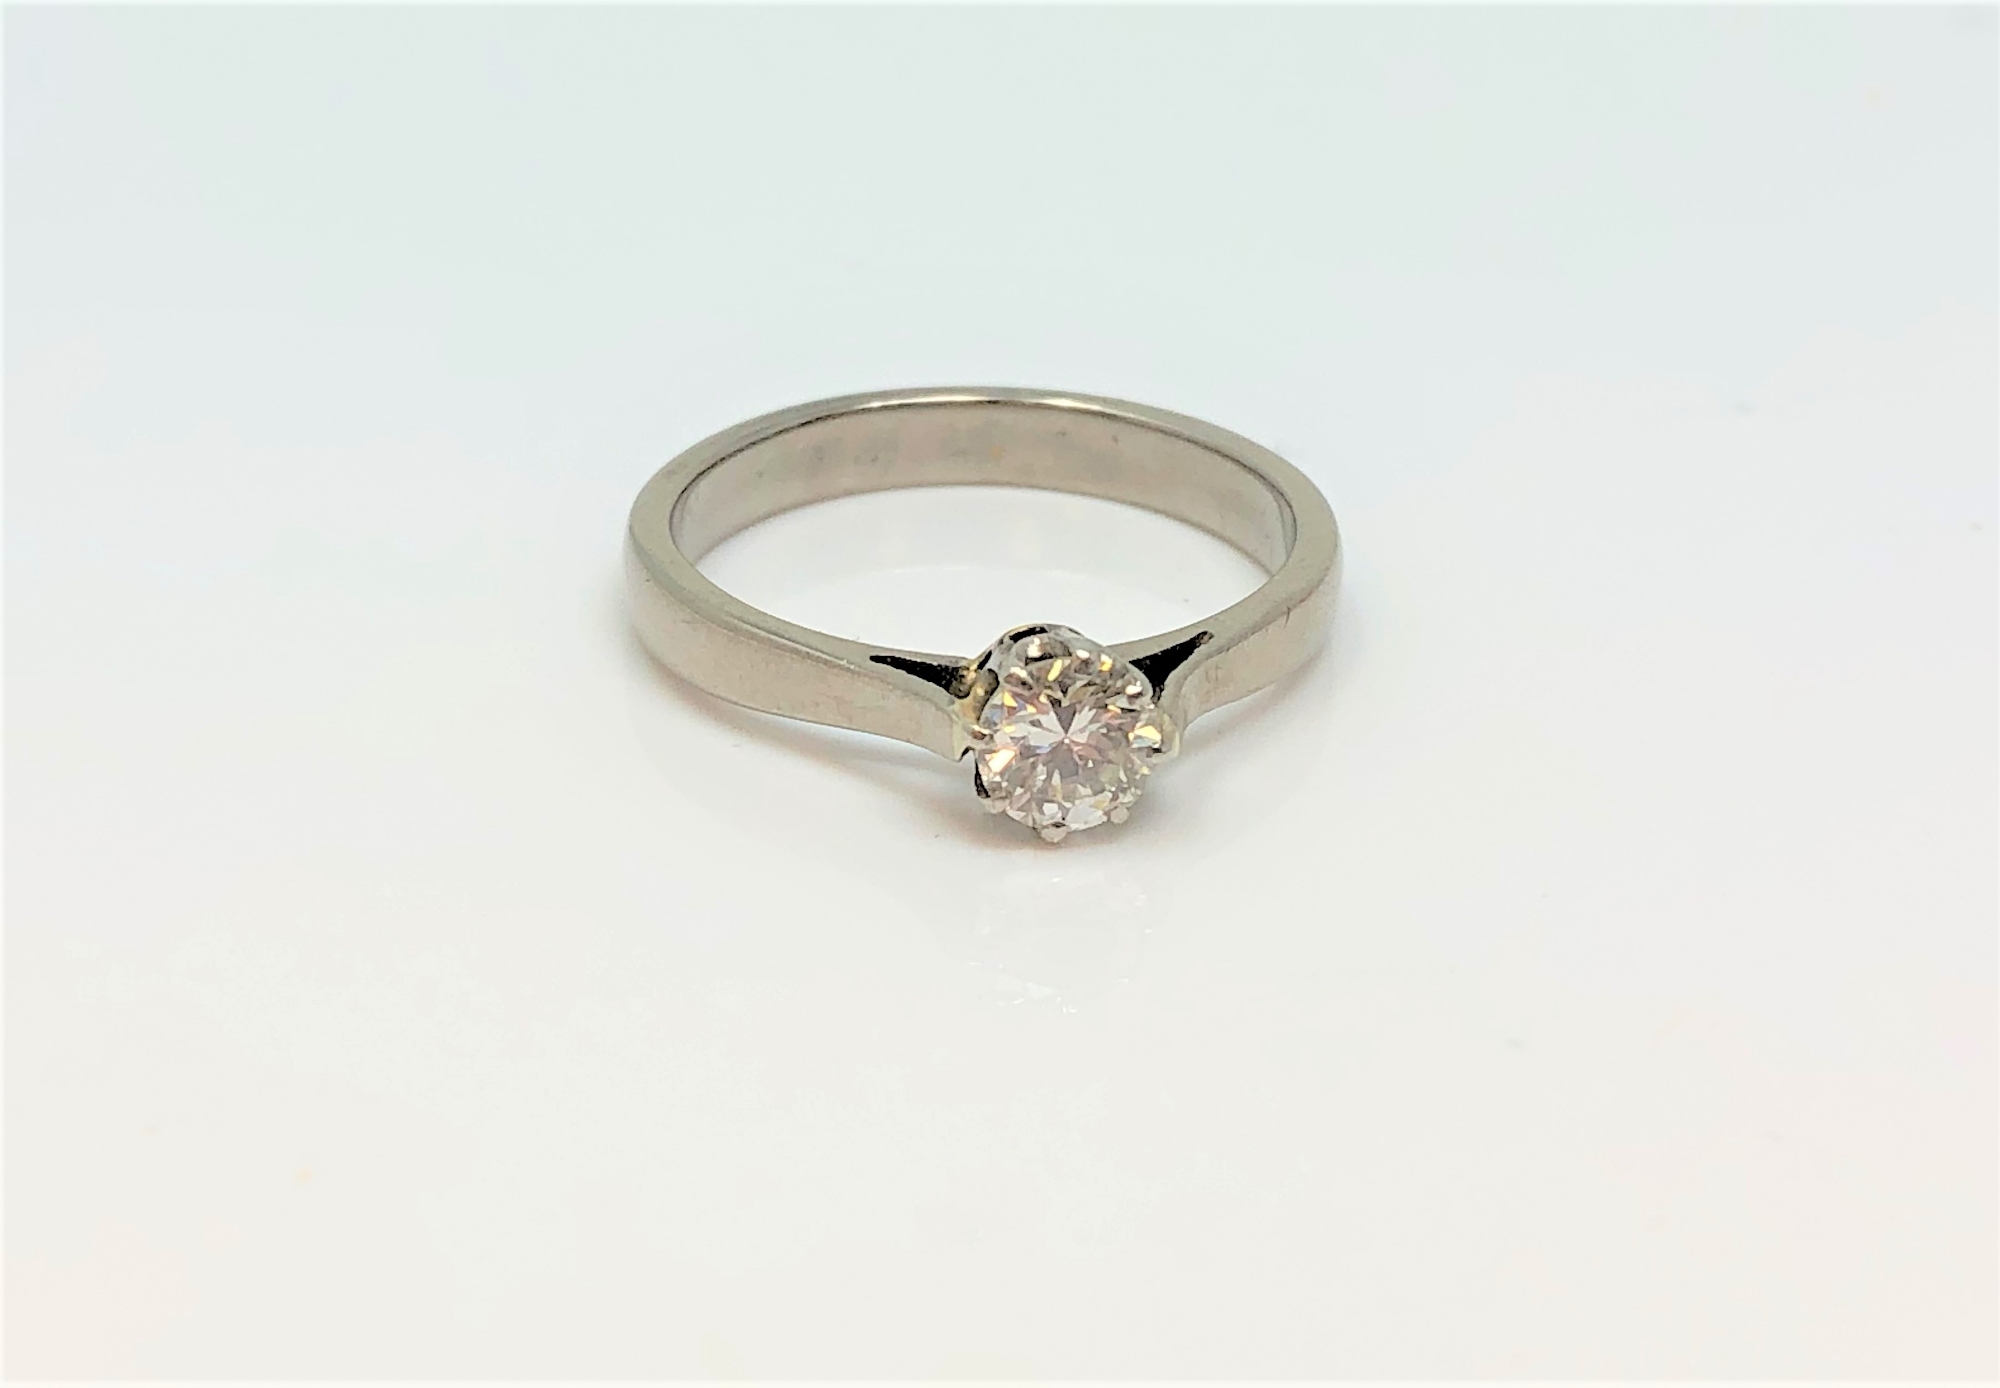 An 18ct gold solitaire diamond ring, approx. 0.